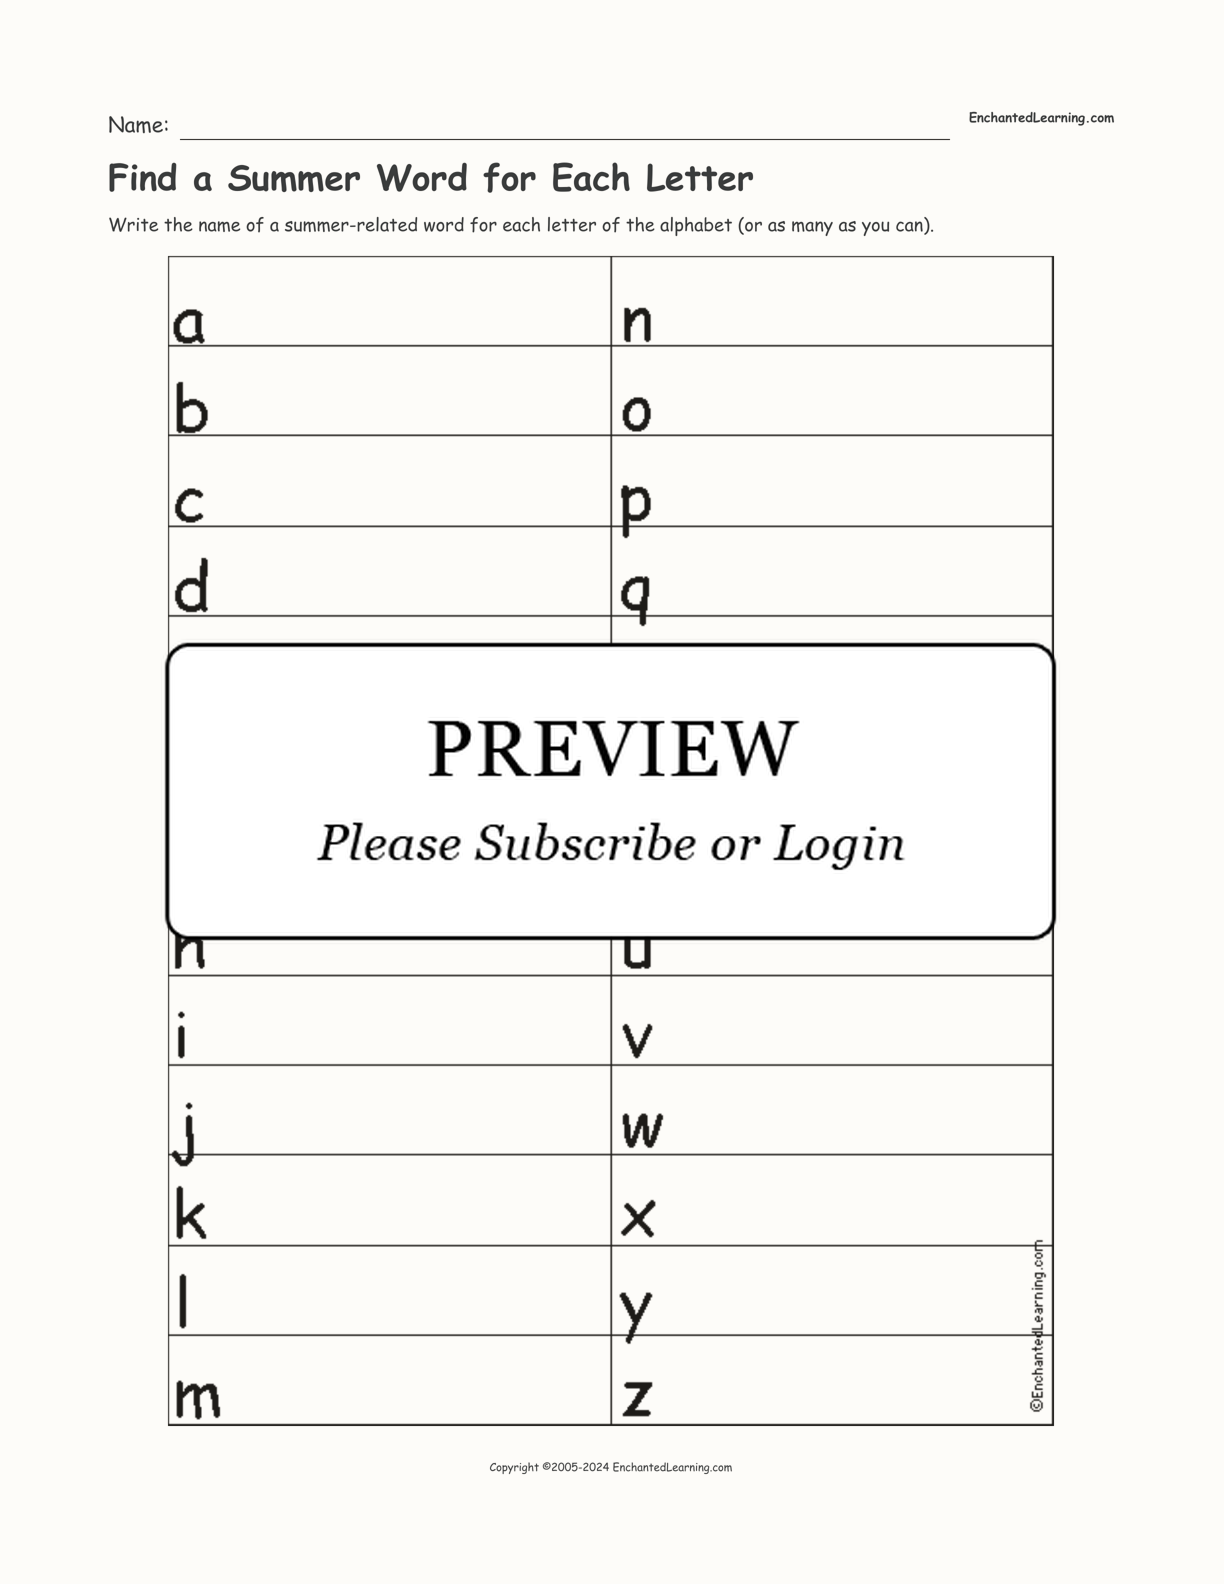 Find a Summer Word for Each Letter interactive worksheet page 1